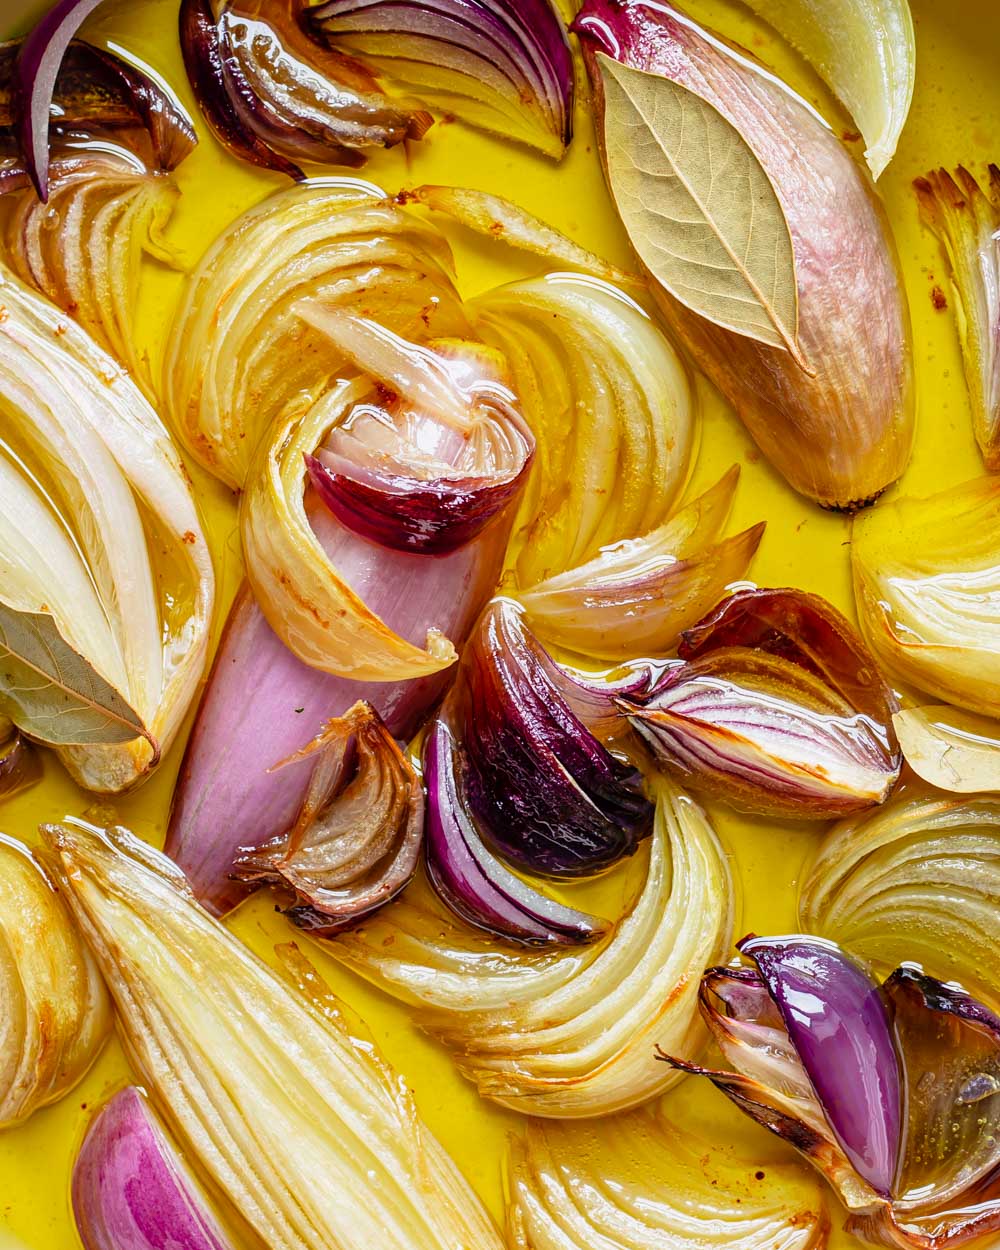 confit shallots and onion, olive oil